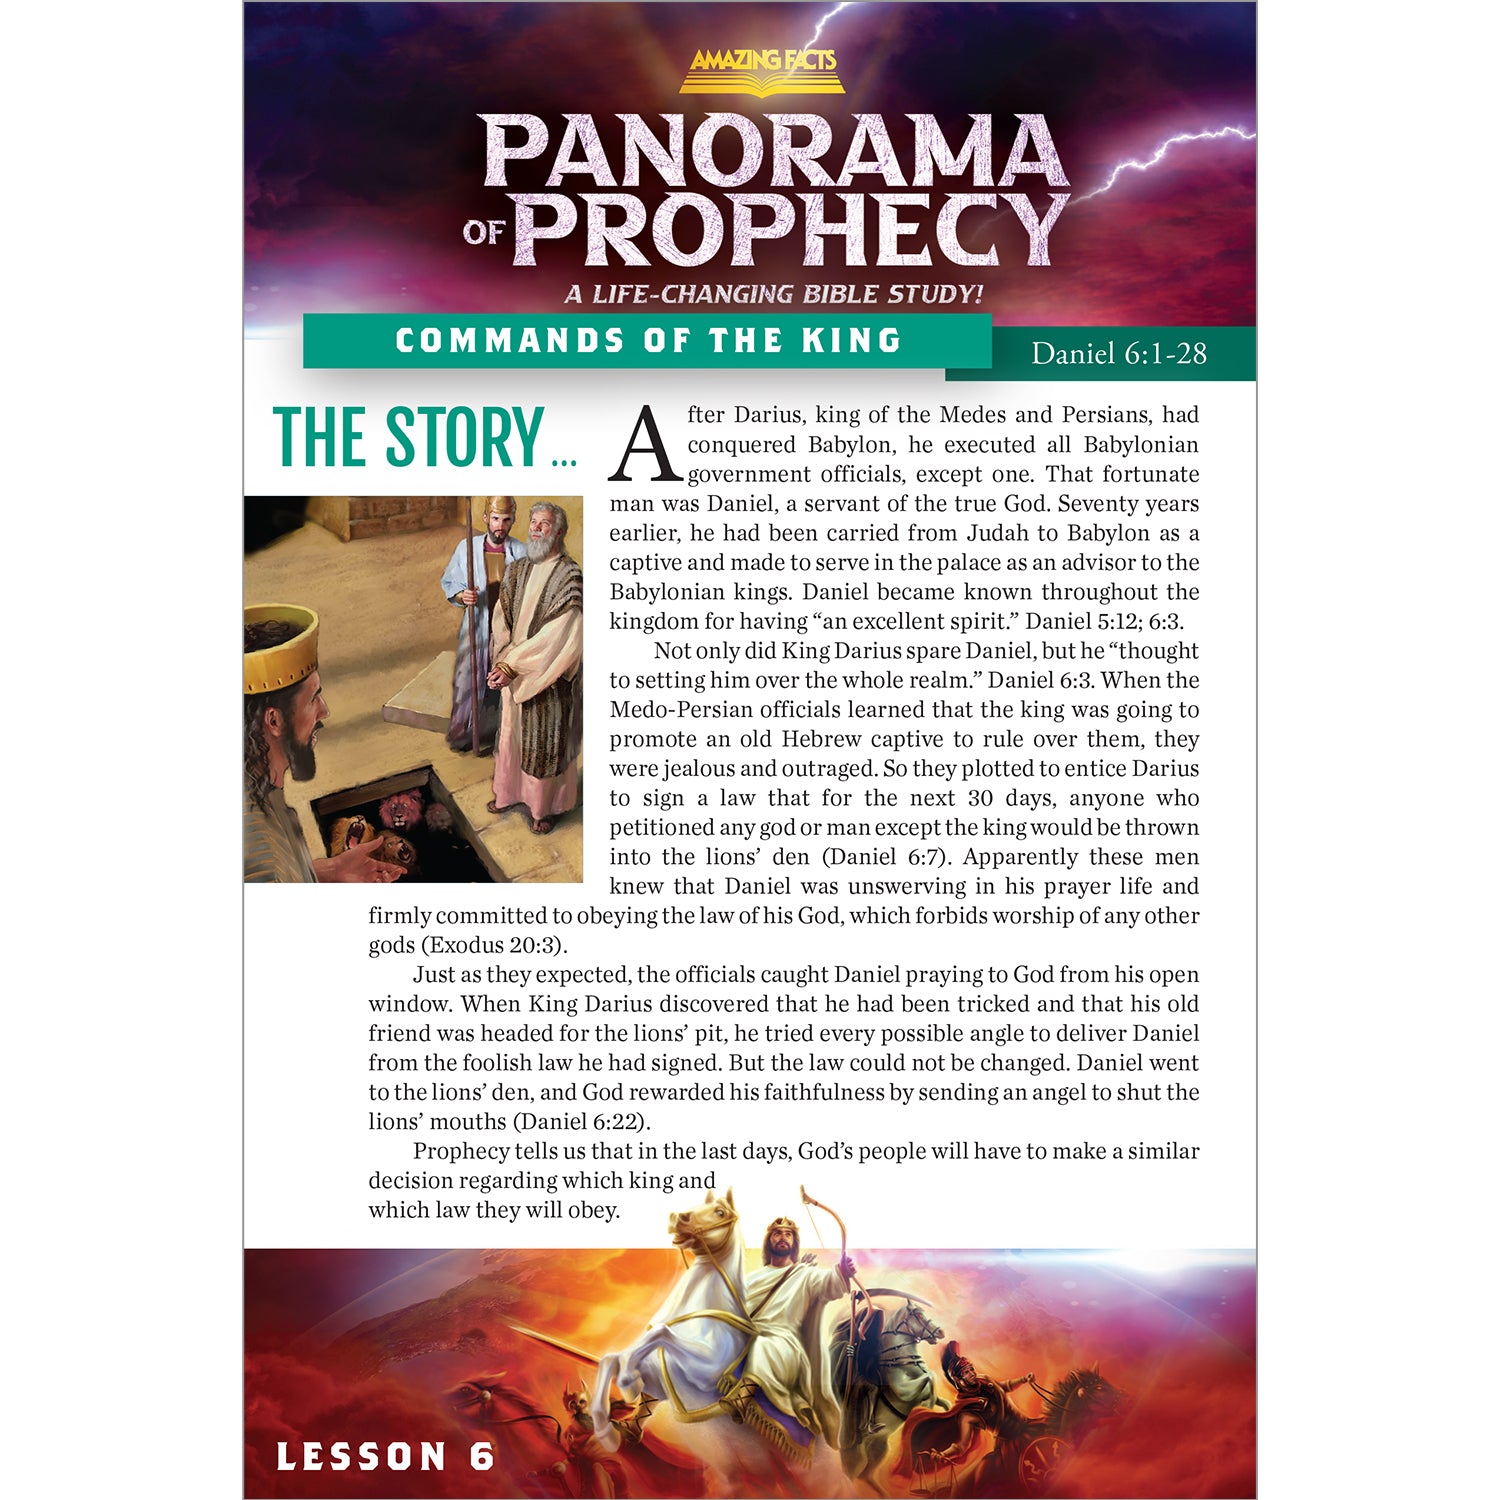 Panorama of Prophecy: Commands of the King Study Guide 06 by Doug Batchelor